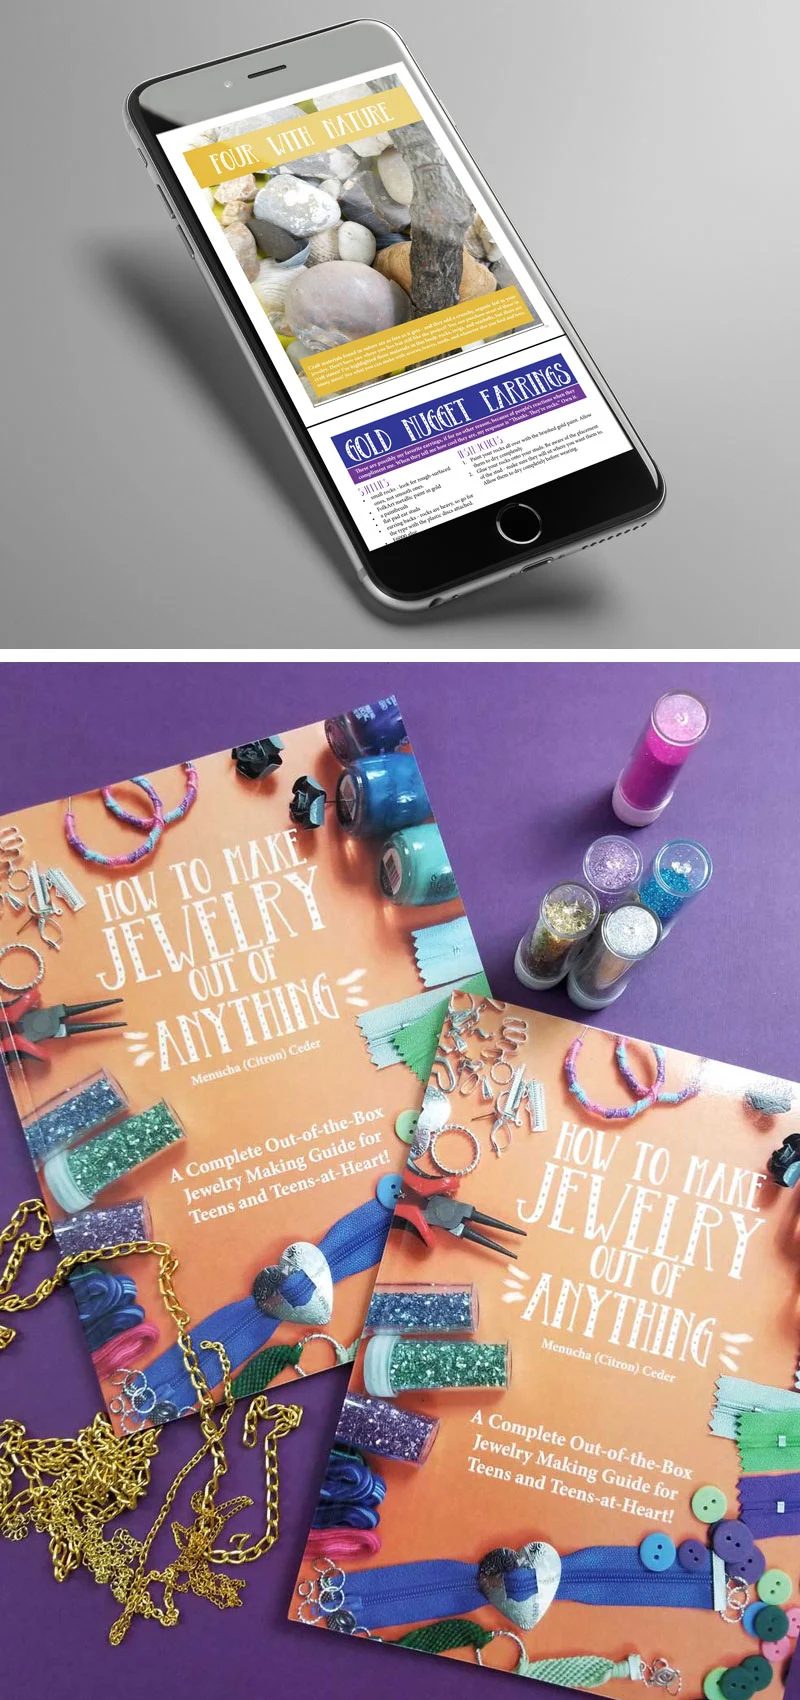 this cool jewelry making book is just what I needed - it's so different and unique - perfect for teens!